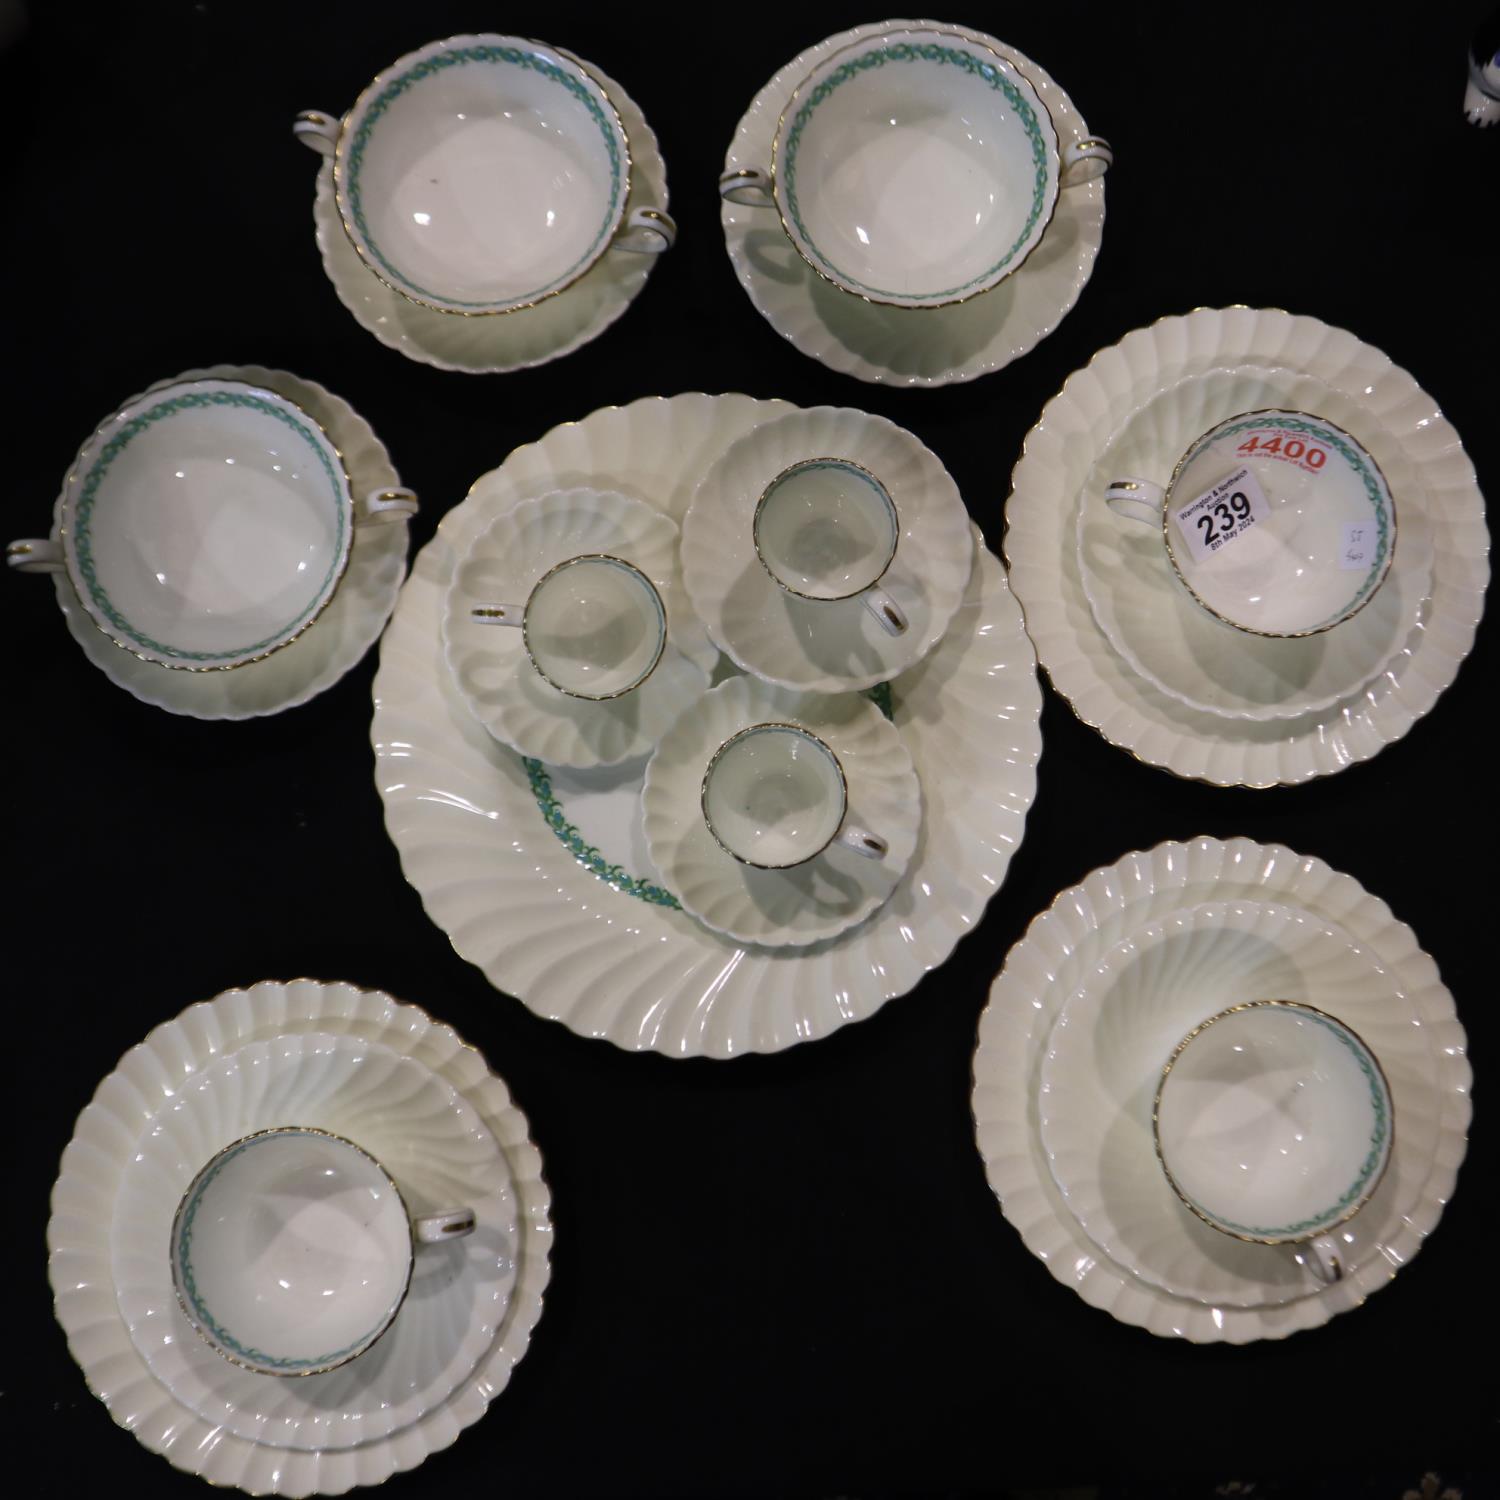 Minton tea service in the Lady Rodney pattern, no cracks or chips. Not available for in-house P&P